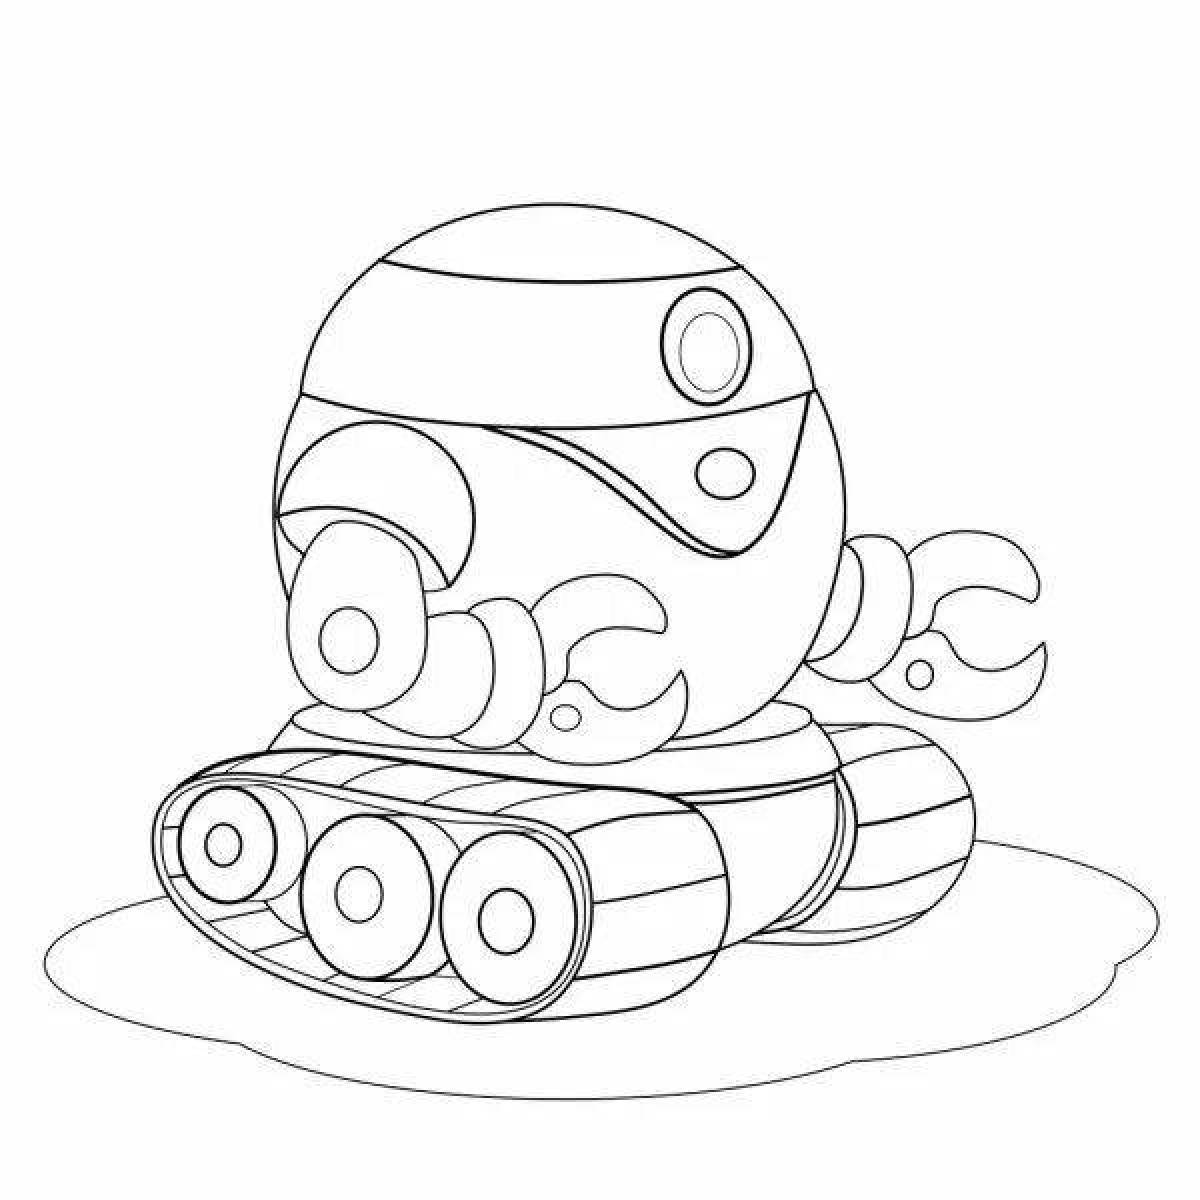 Dynamic rover coloring page